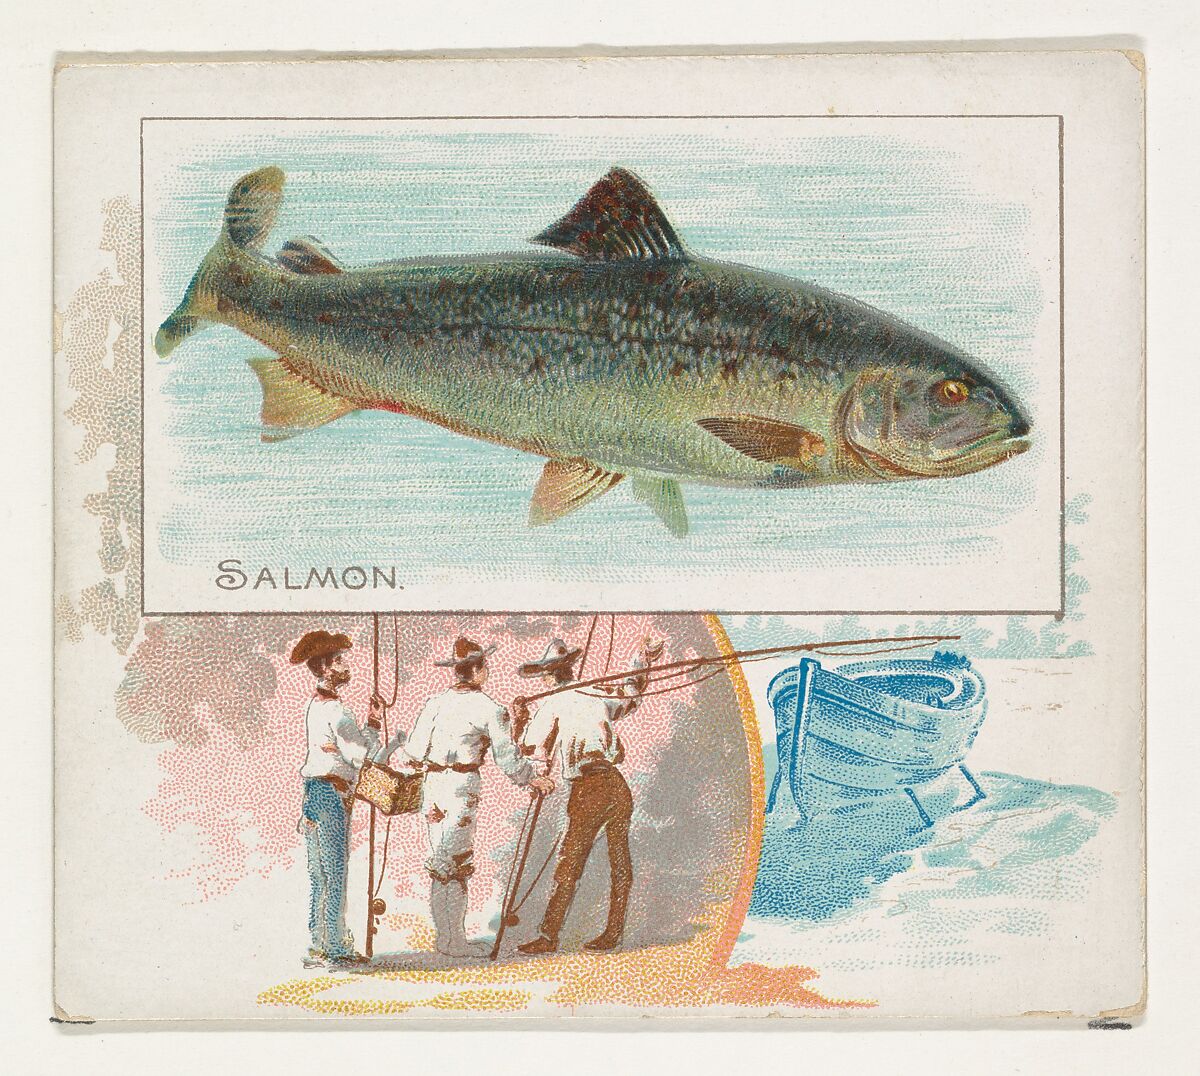 Salmon, from Fish from American Waters series (N39) for Allen & Ginter Cigarettes, Issued by Allen &amp; Ginter (American, Richmond, Virginia), Commercial color lithograph 